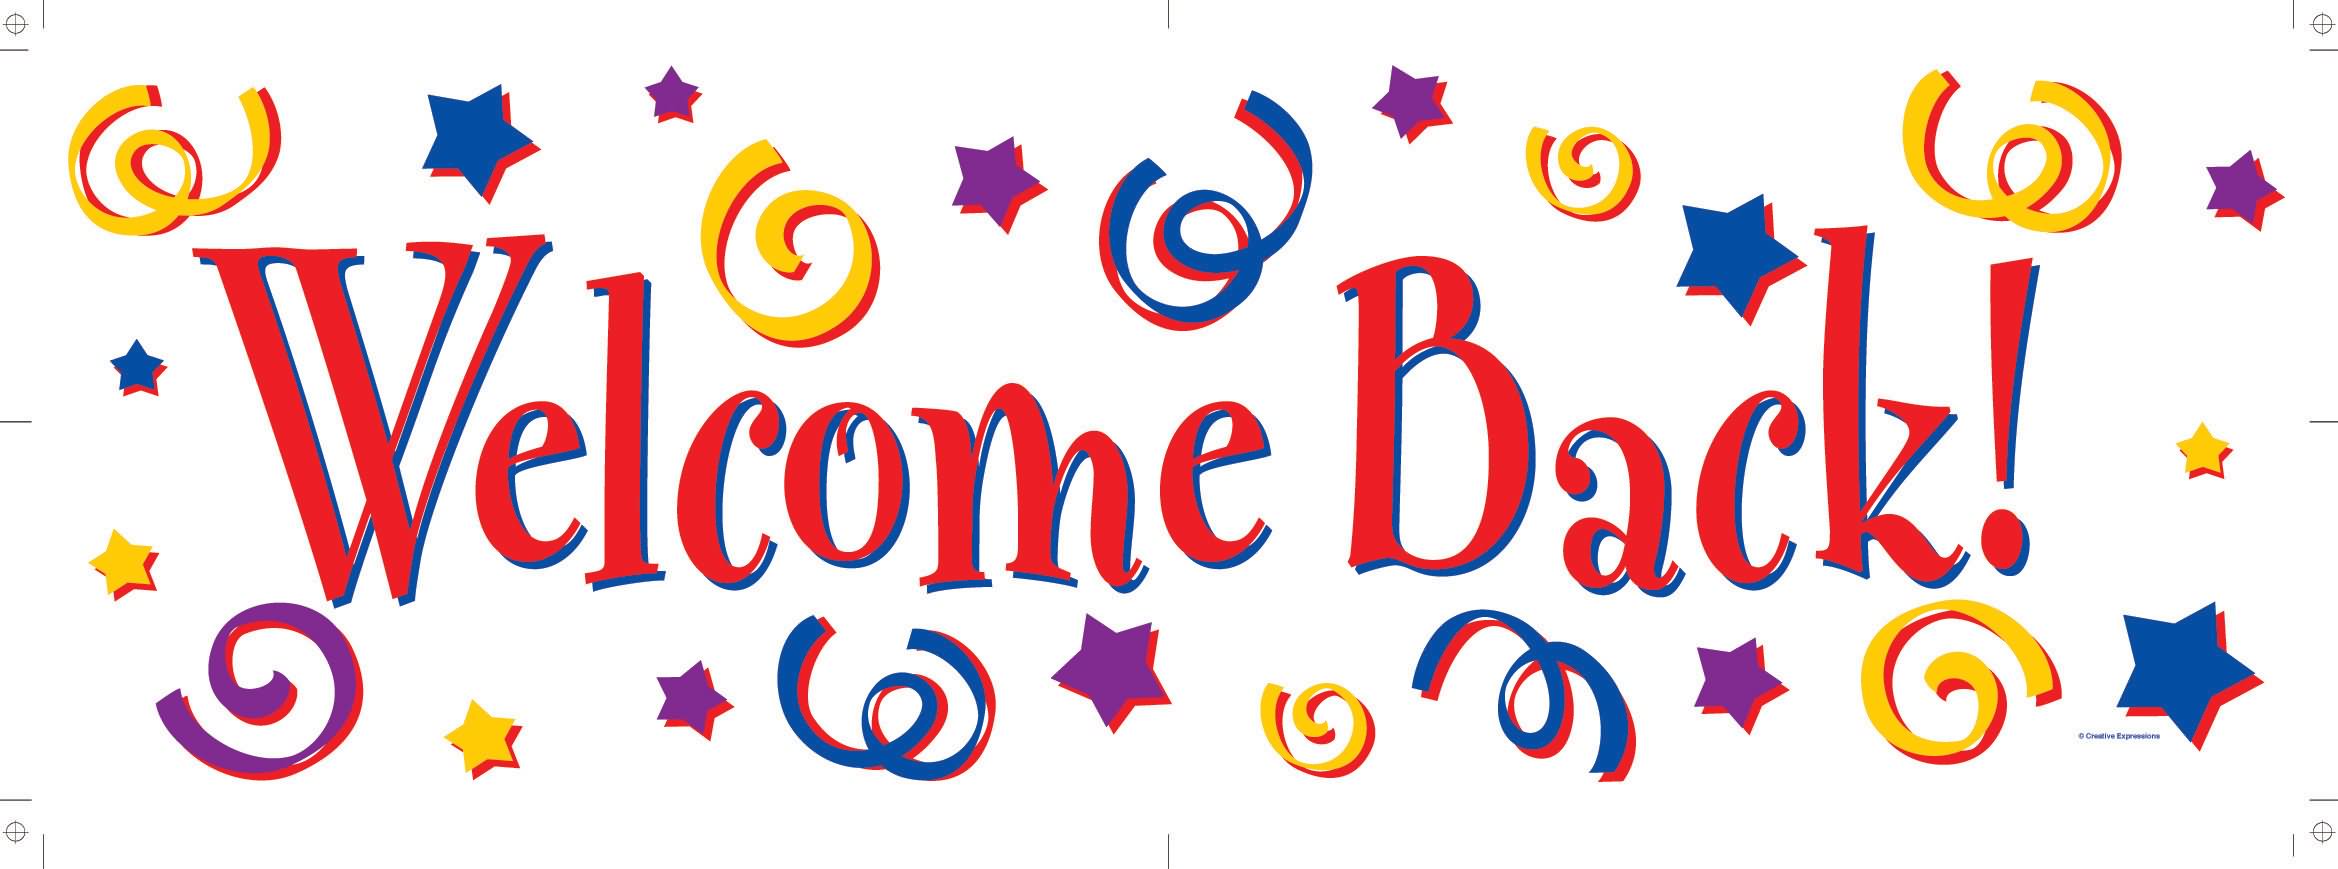 Welcome back sign clipart - ClipartFox